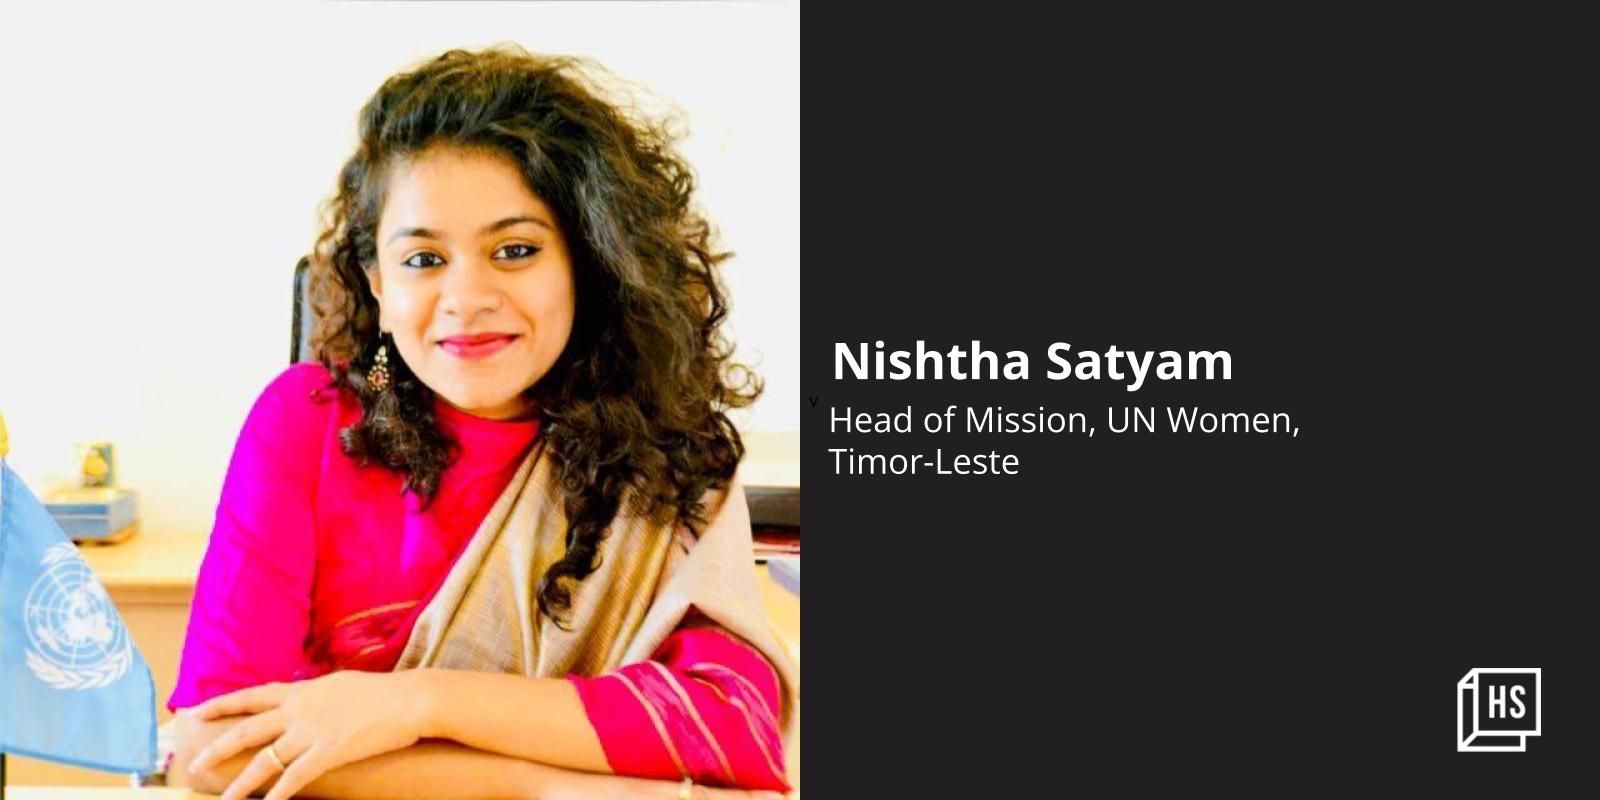 From working in the private sector to being a UN Women leader, the incredible journey of Nishtha Satyam 